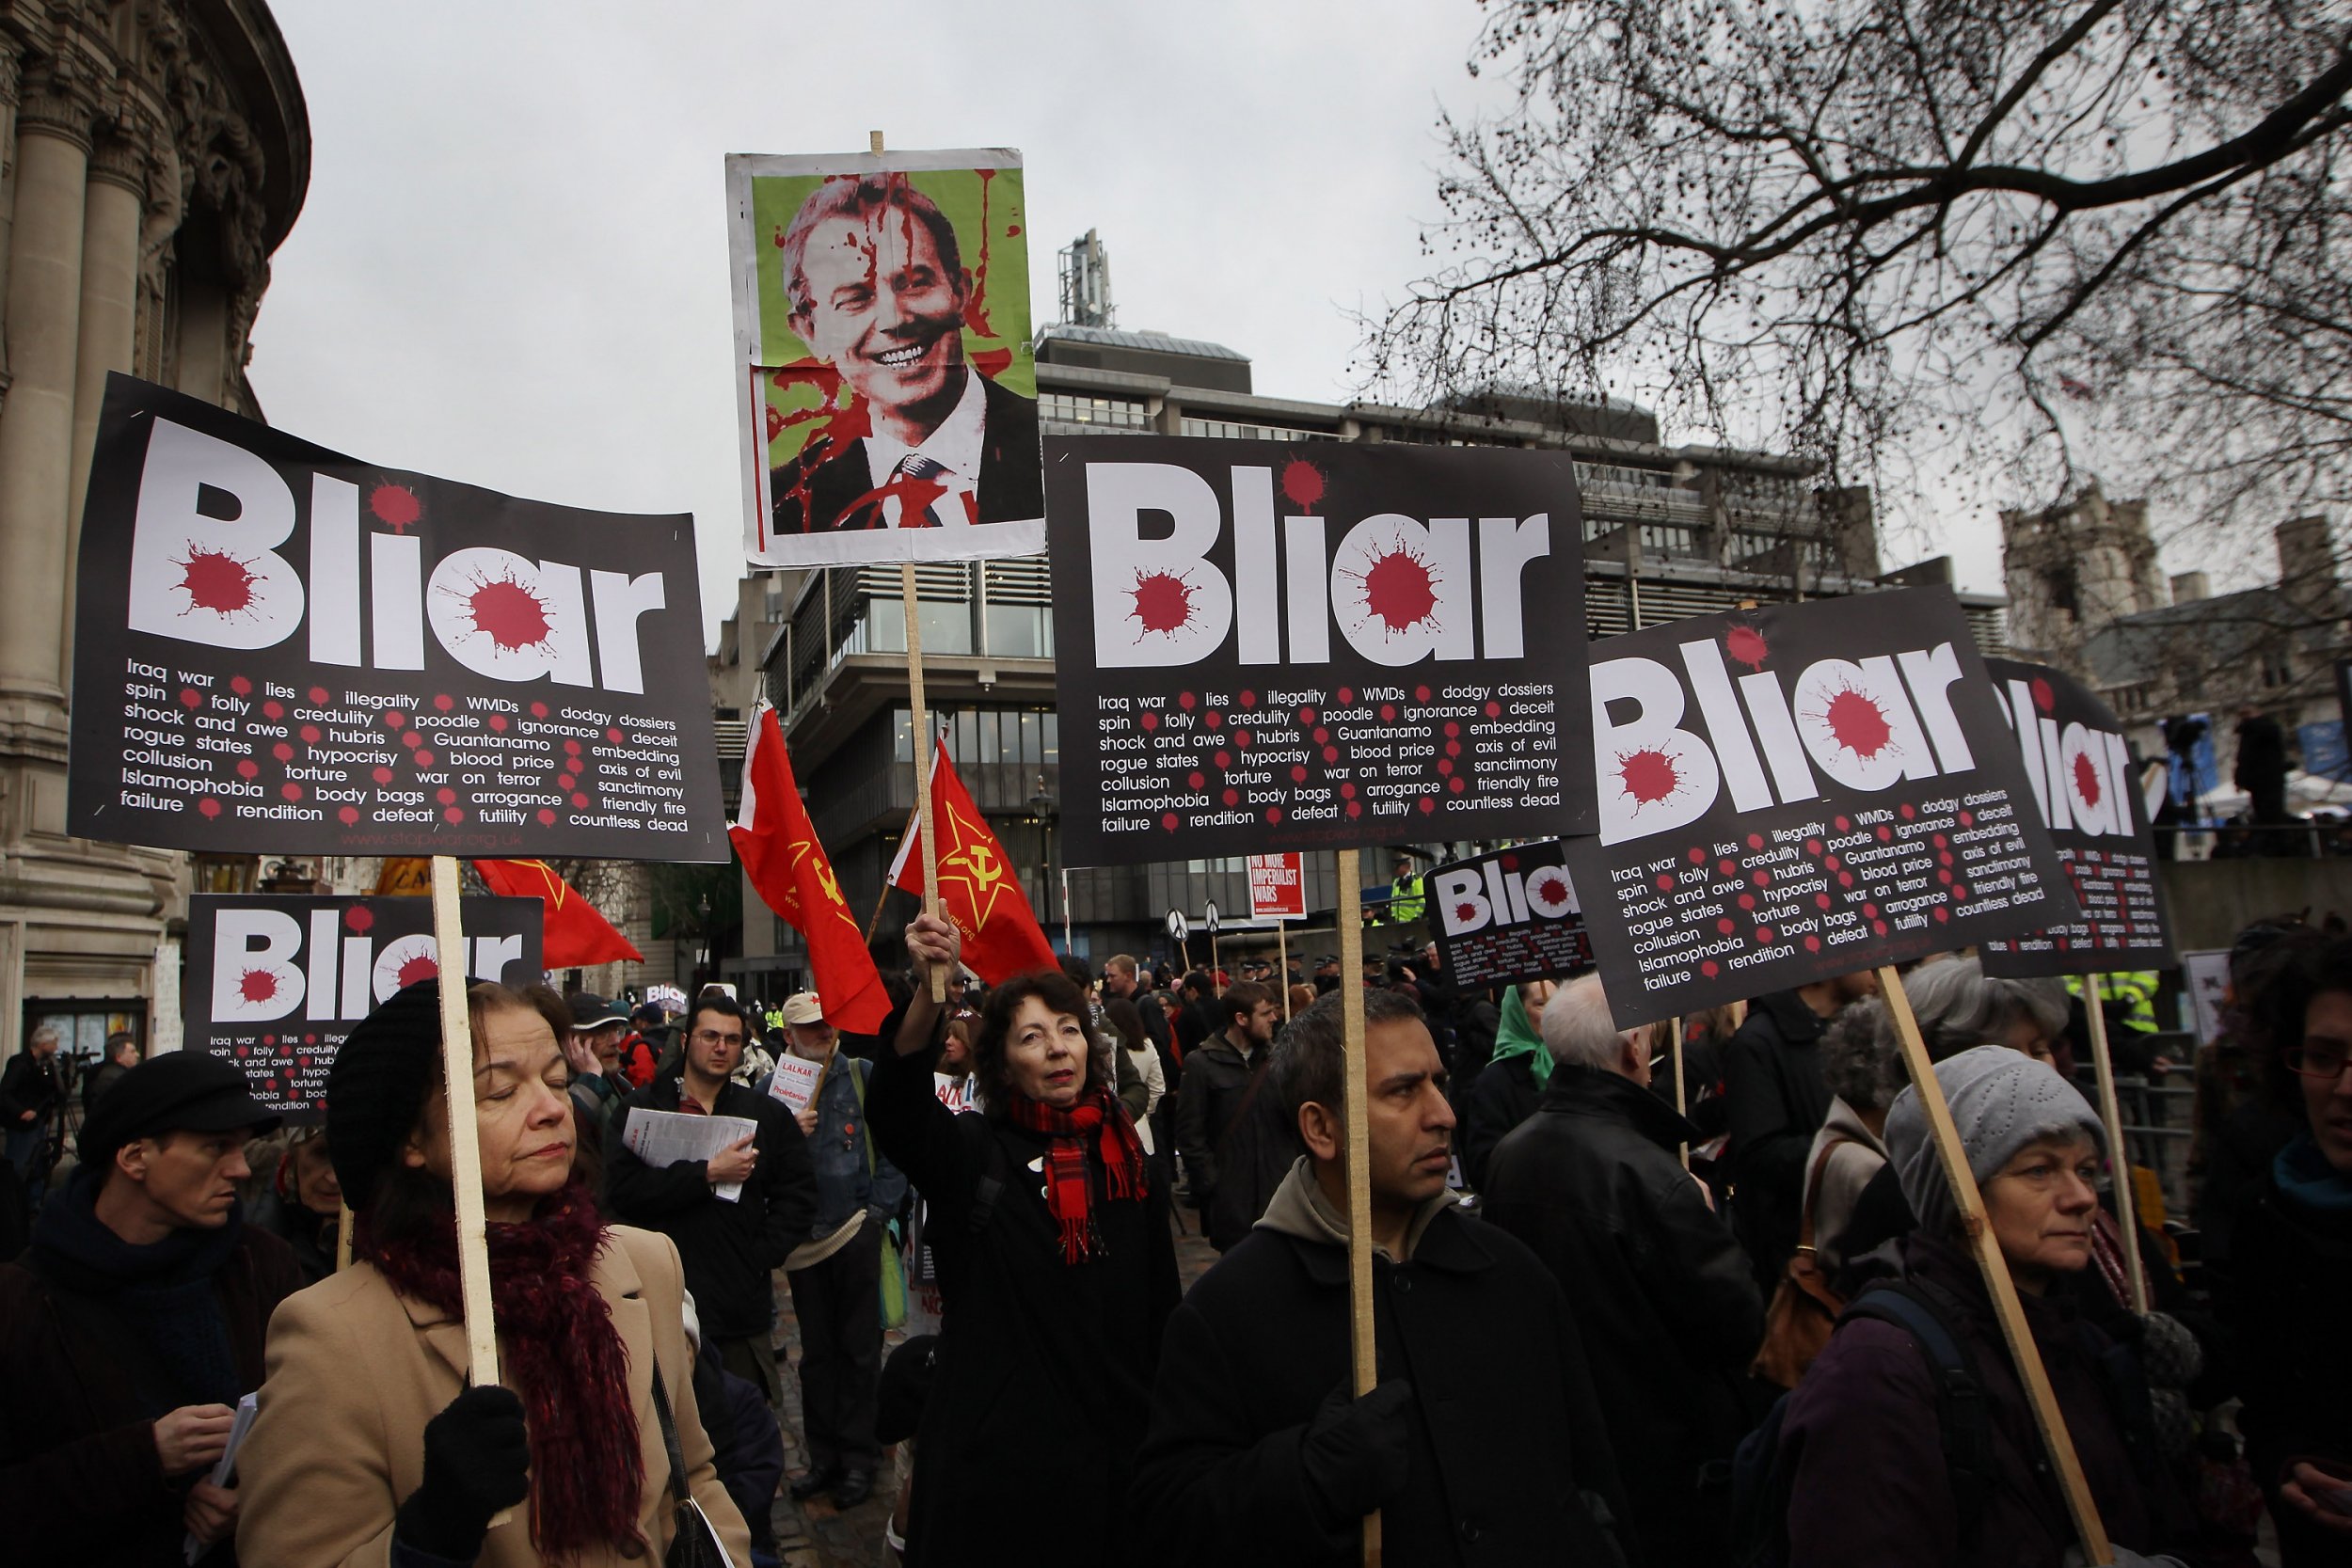 Protests against Tony Blair